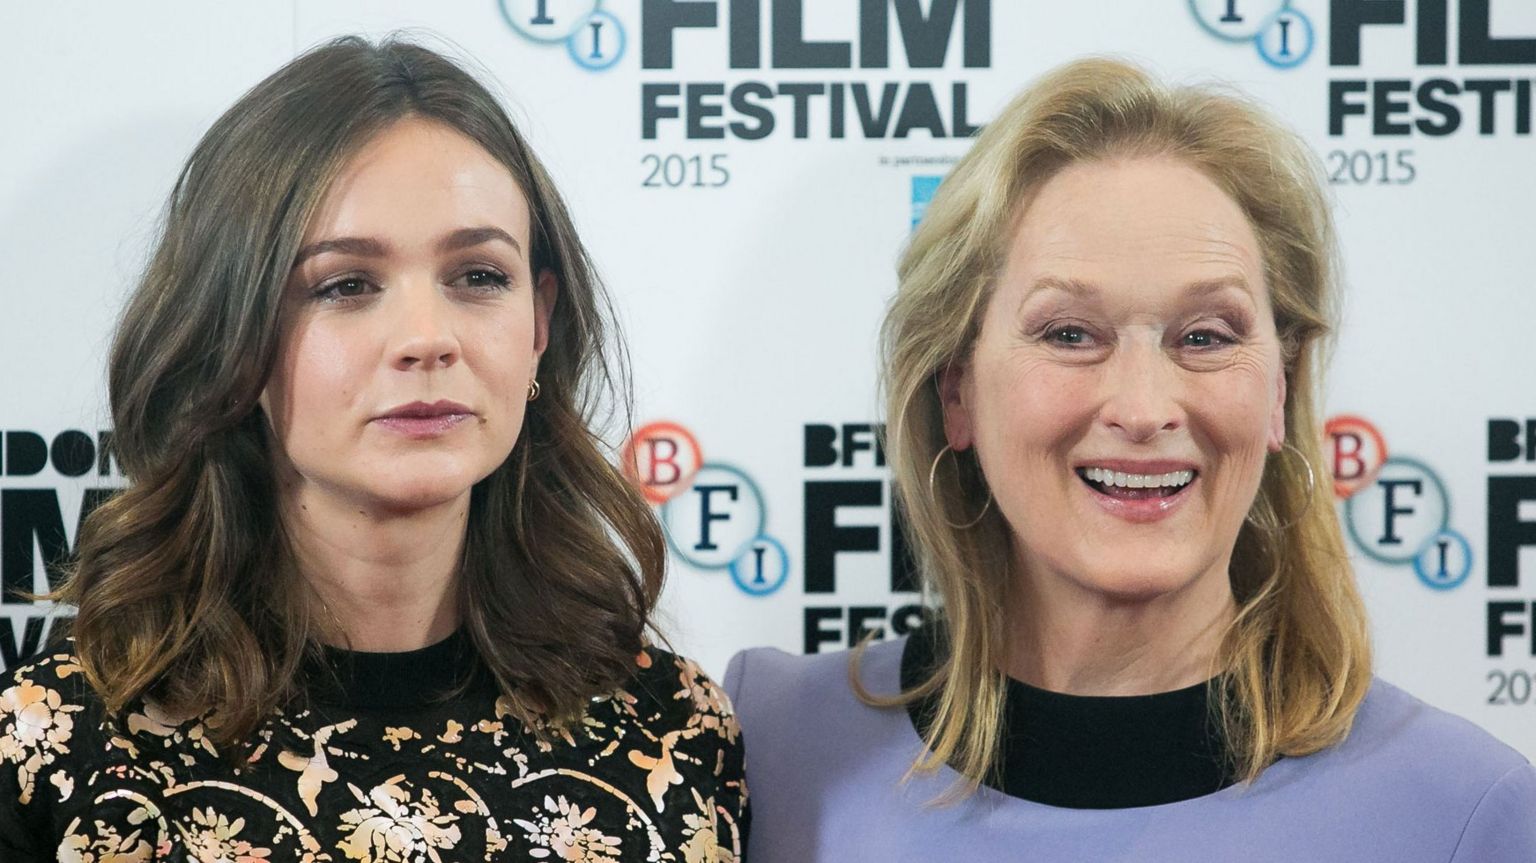 Carey Mulligan (left) and Meryl Streep at a photocall for their new film, Suffragette, at The Lanesborough Hotel, in London